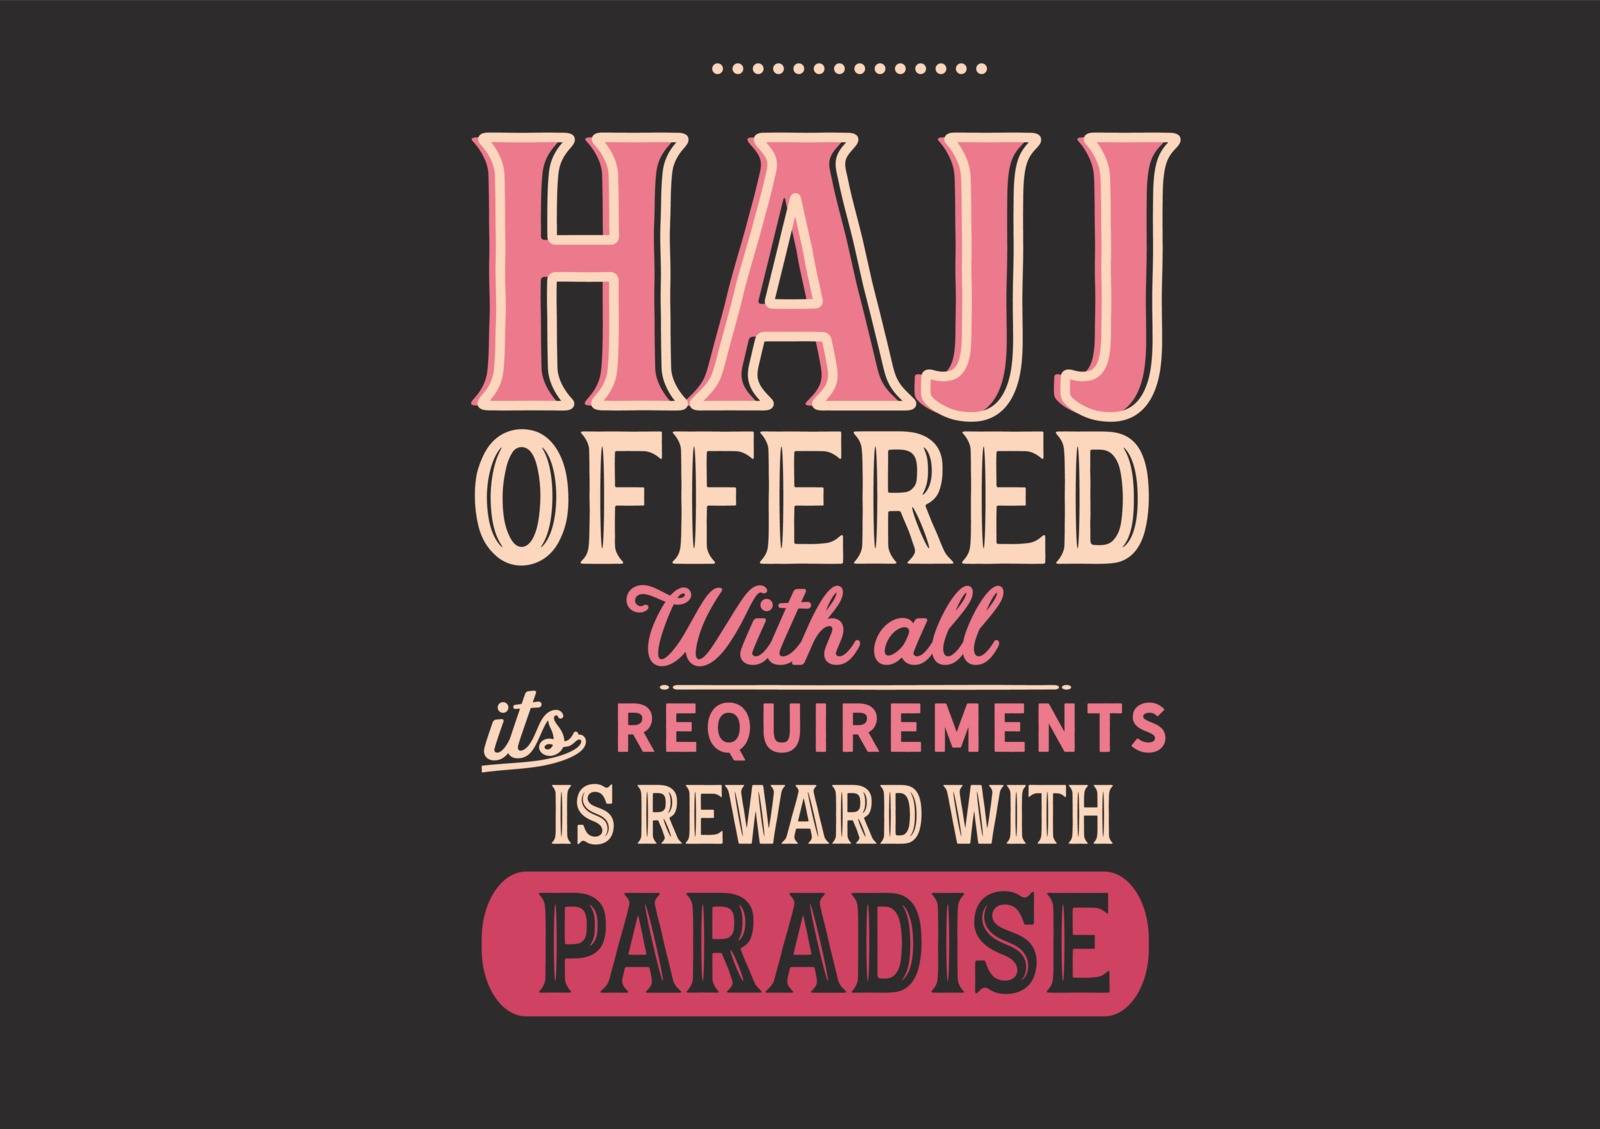 Hajj offered with all its requirements is reward with paradise